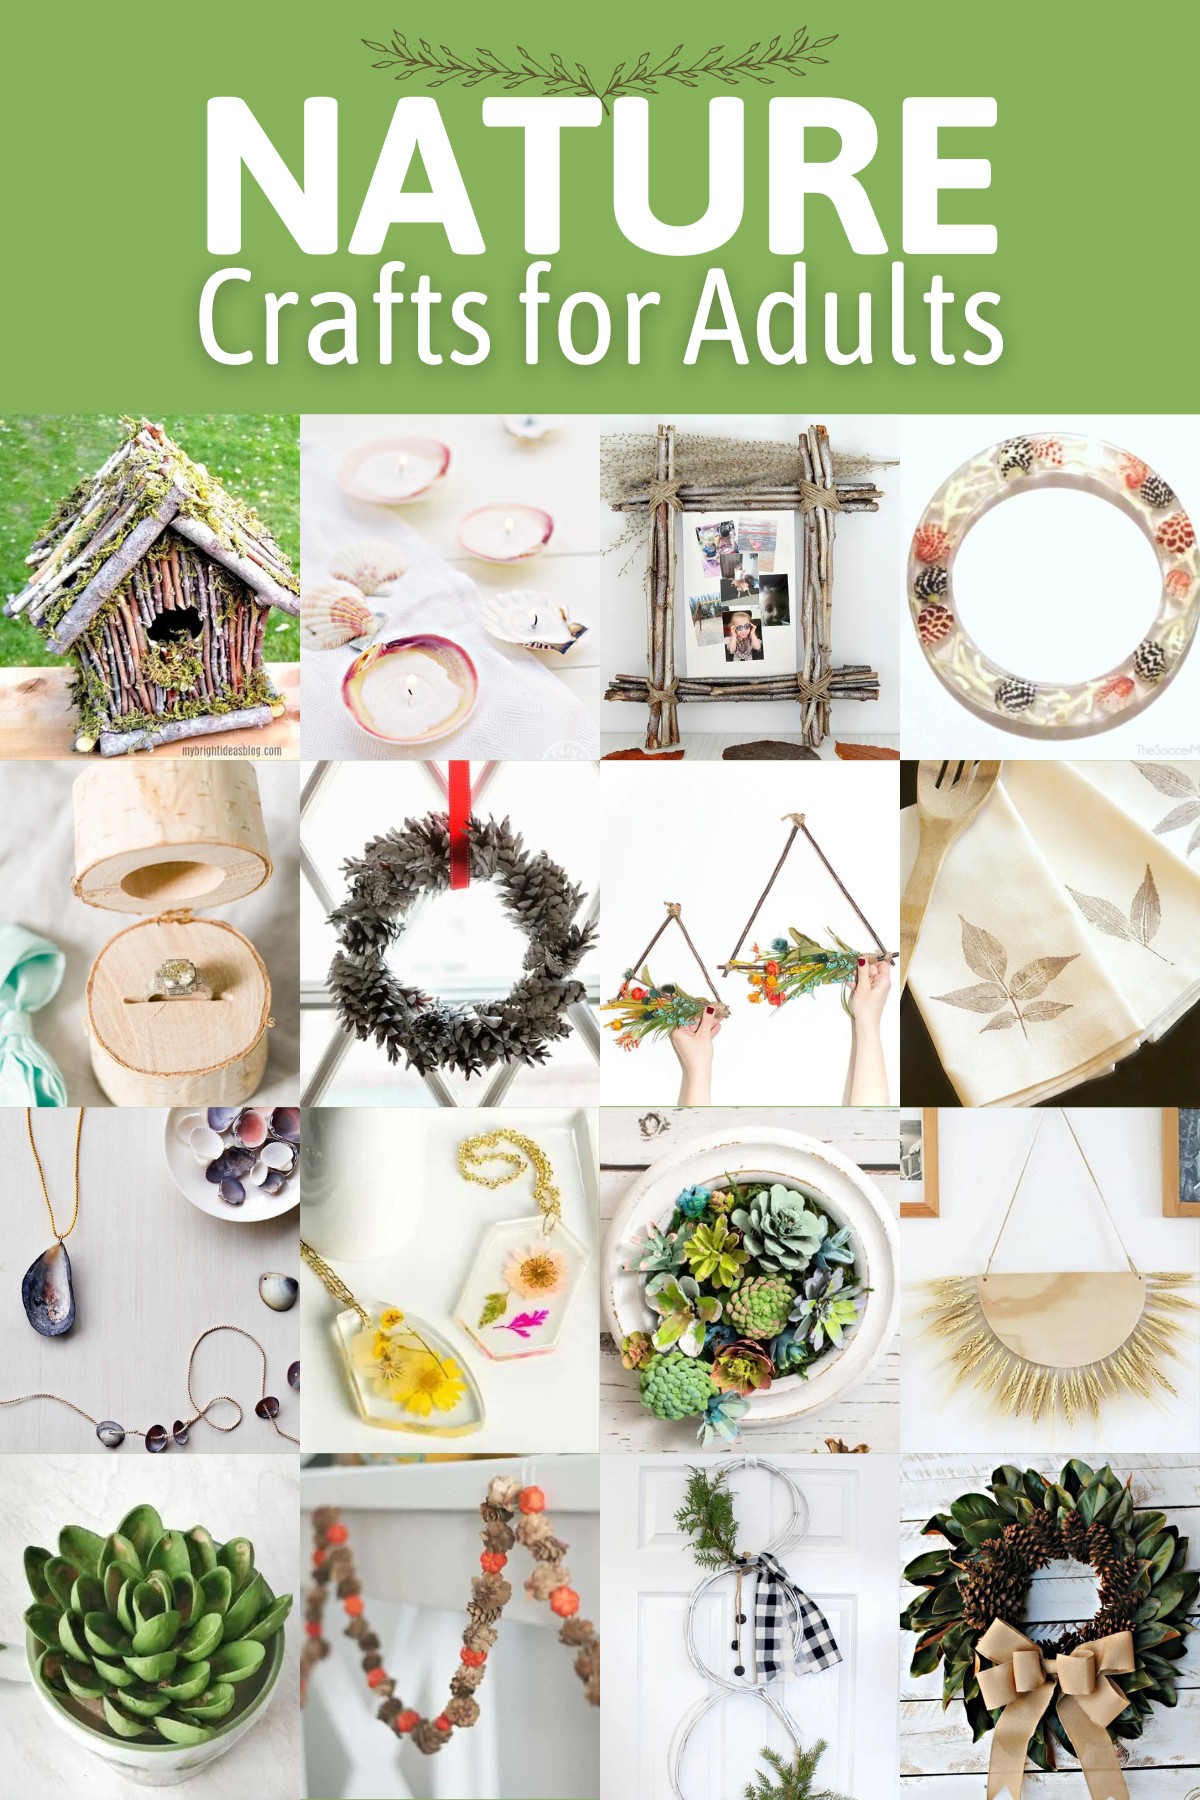 Nature Crafts for Adults